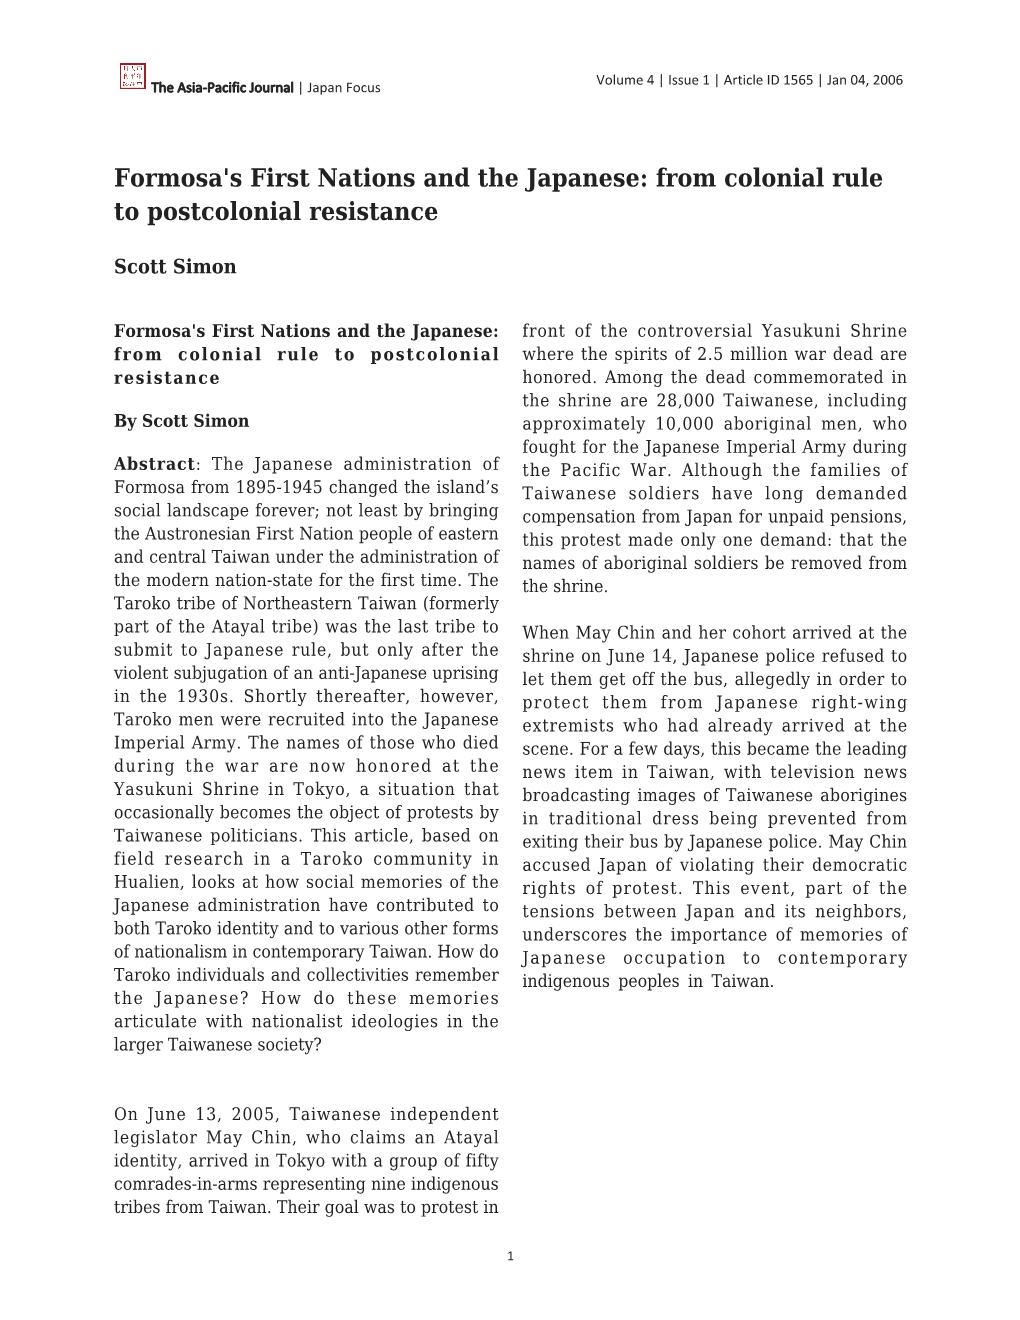 Formosa's First Nations and the Japanese: from Colonial Rule to Postcolonial Resistance